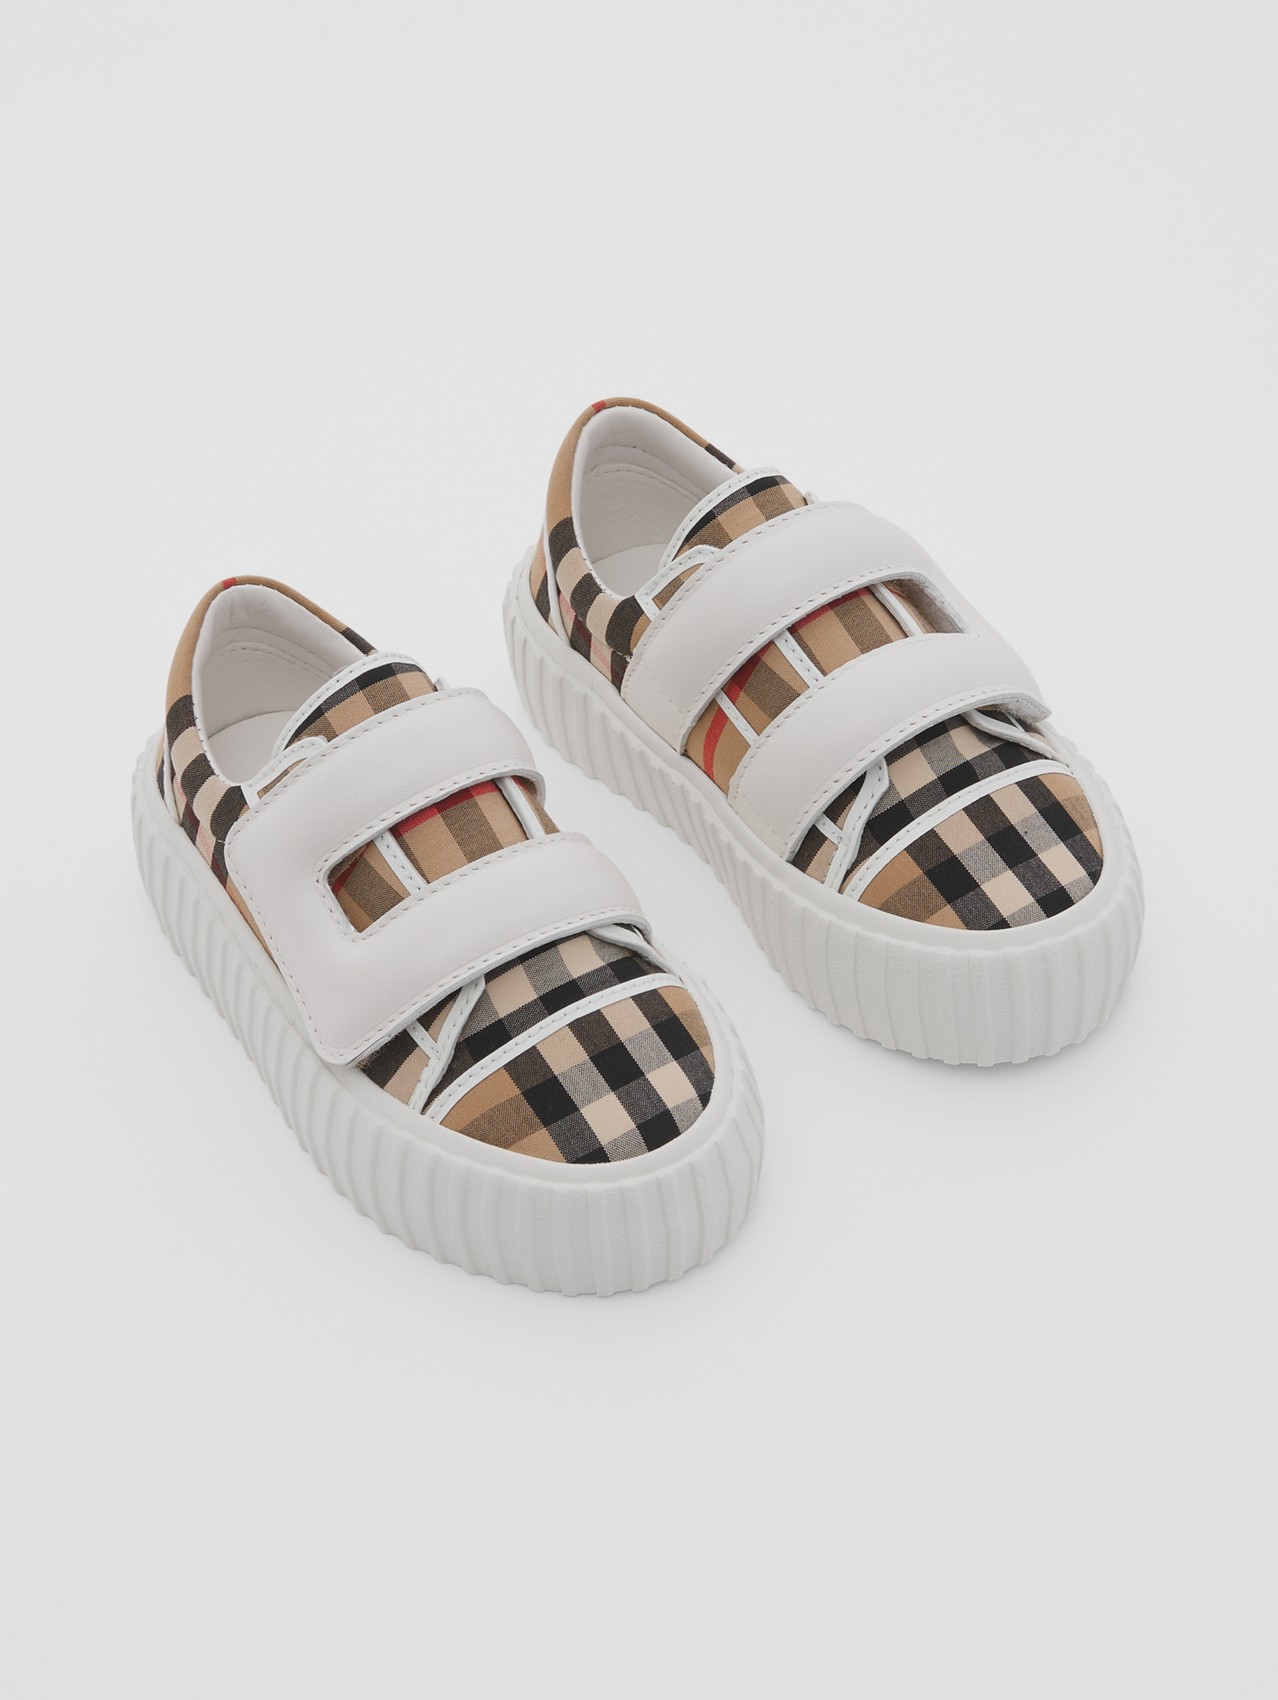 Vintage Check Cotton and Leather Sneakers in Archive Beige